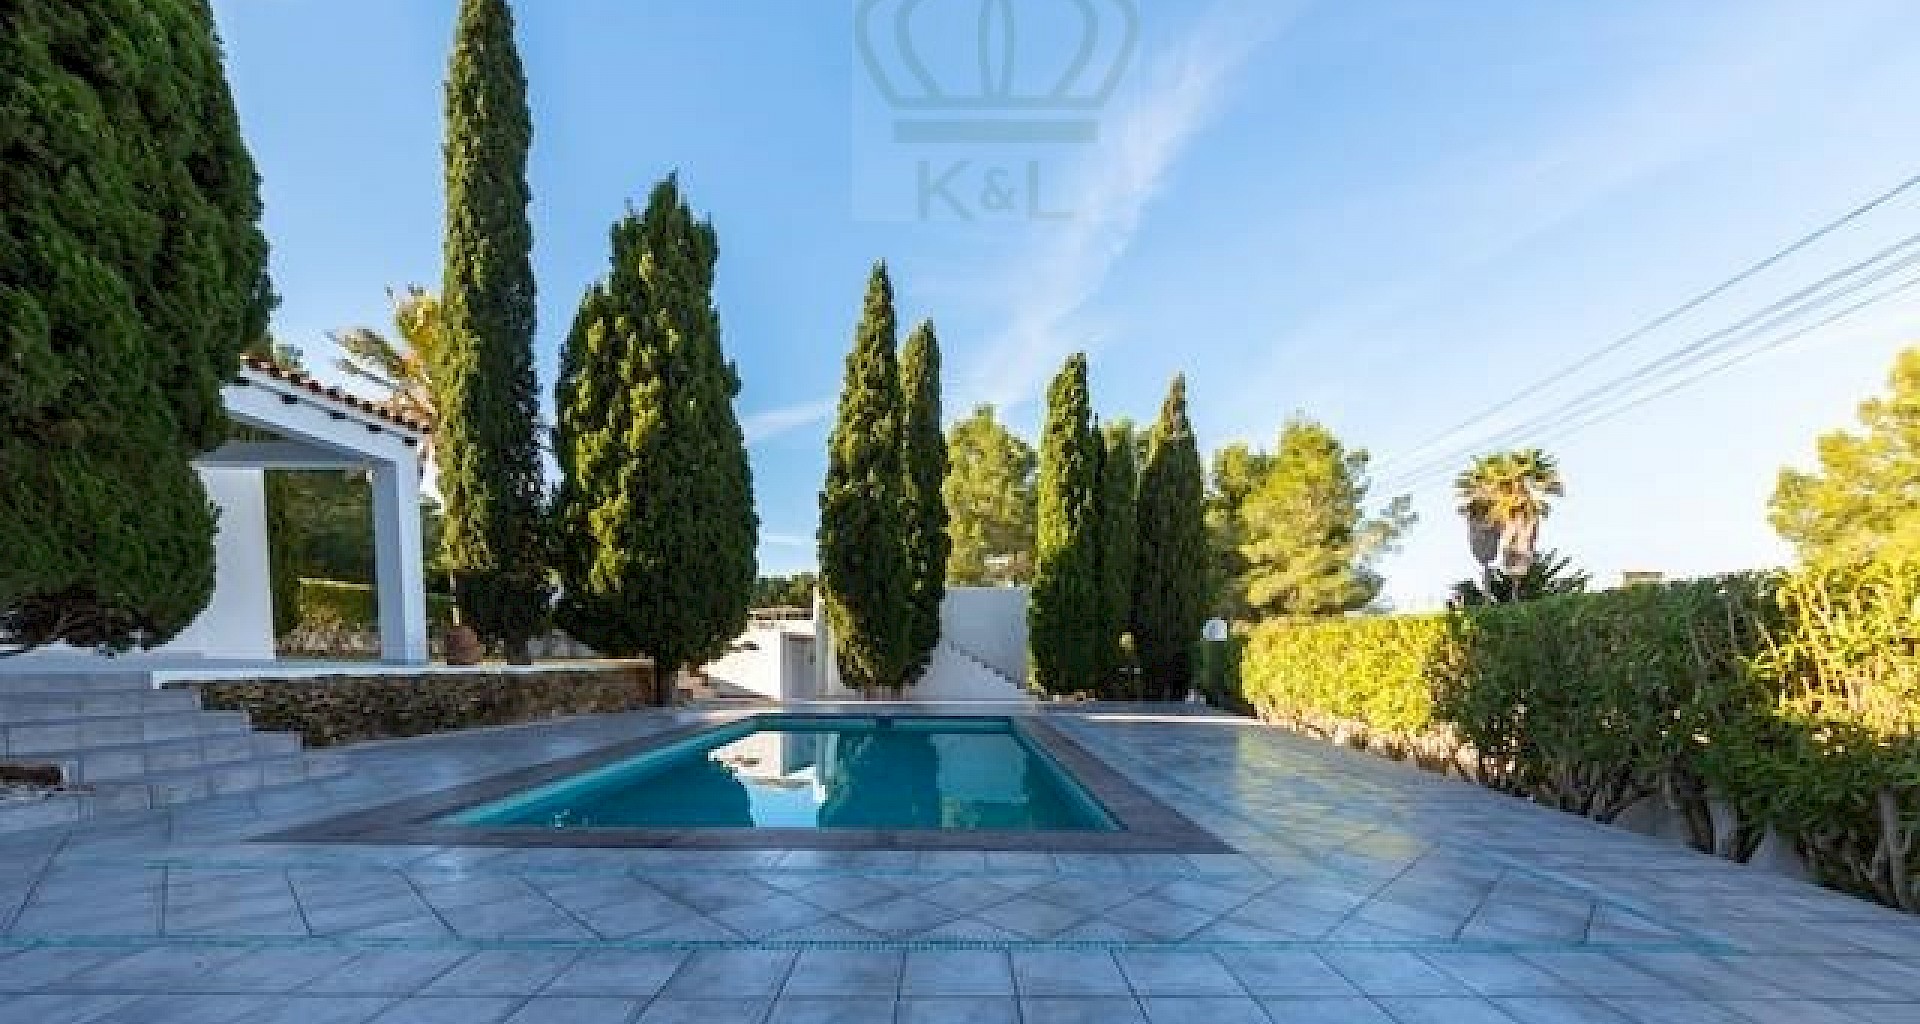 KROHN & LUEDEMANN Completely renovated house in Ibiza with pool and lots of privacy Benimussa (12)